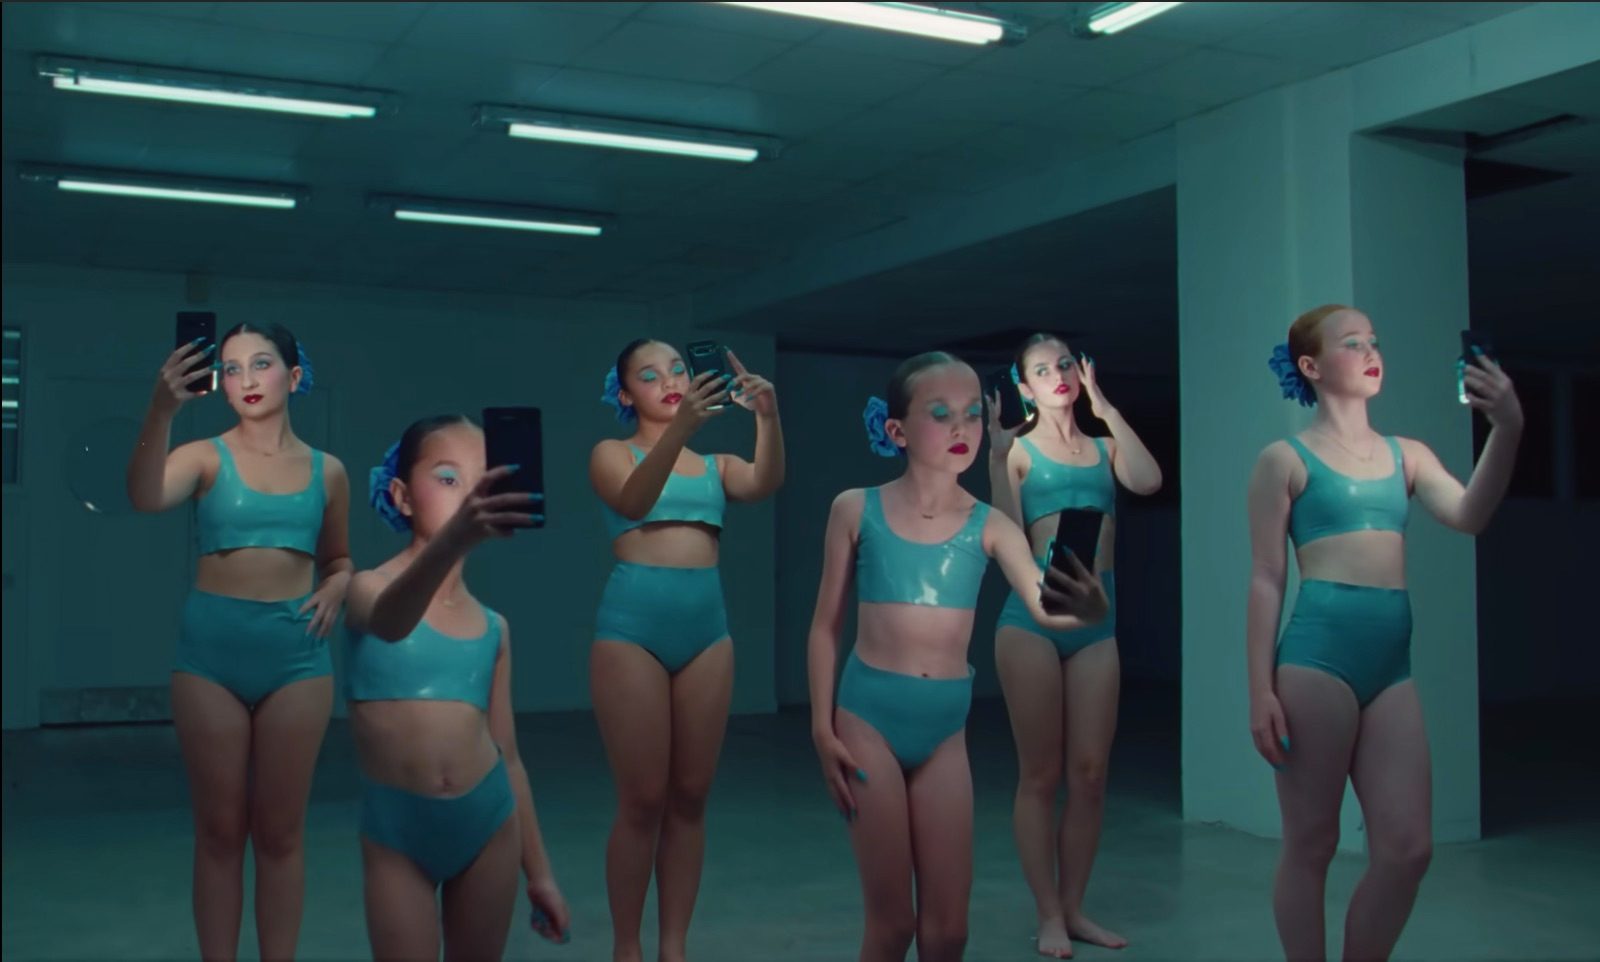 WATCH: Christina Aguilera brings ‘Beautiful’ into social media age with new music video